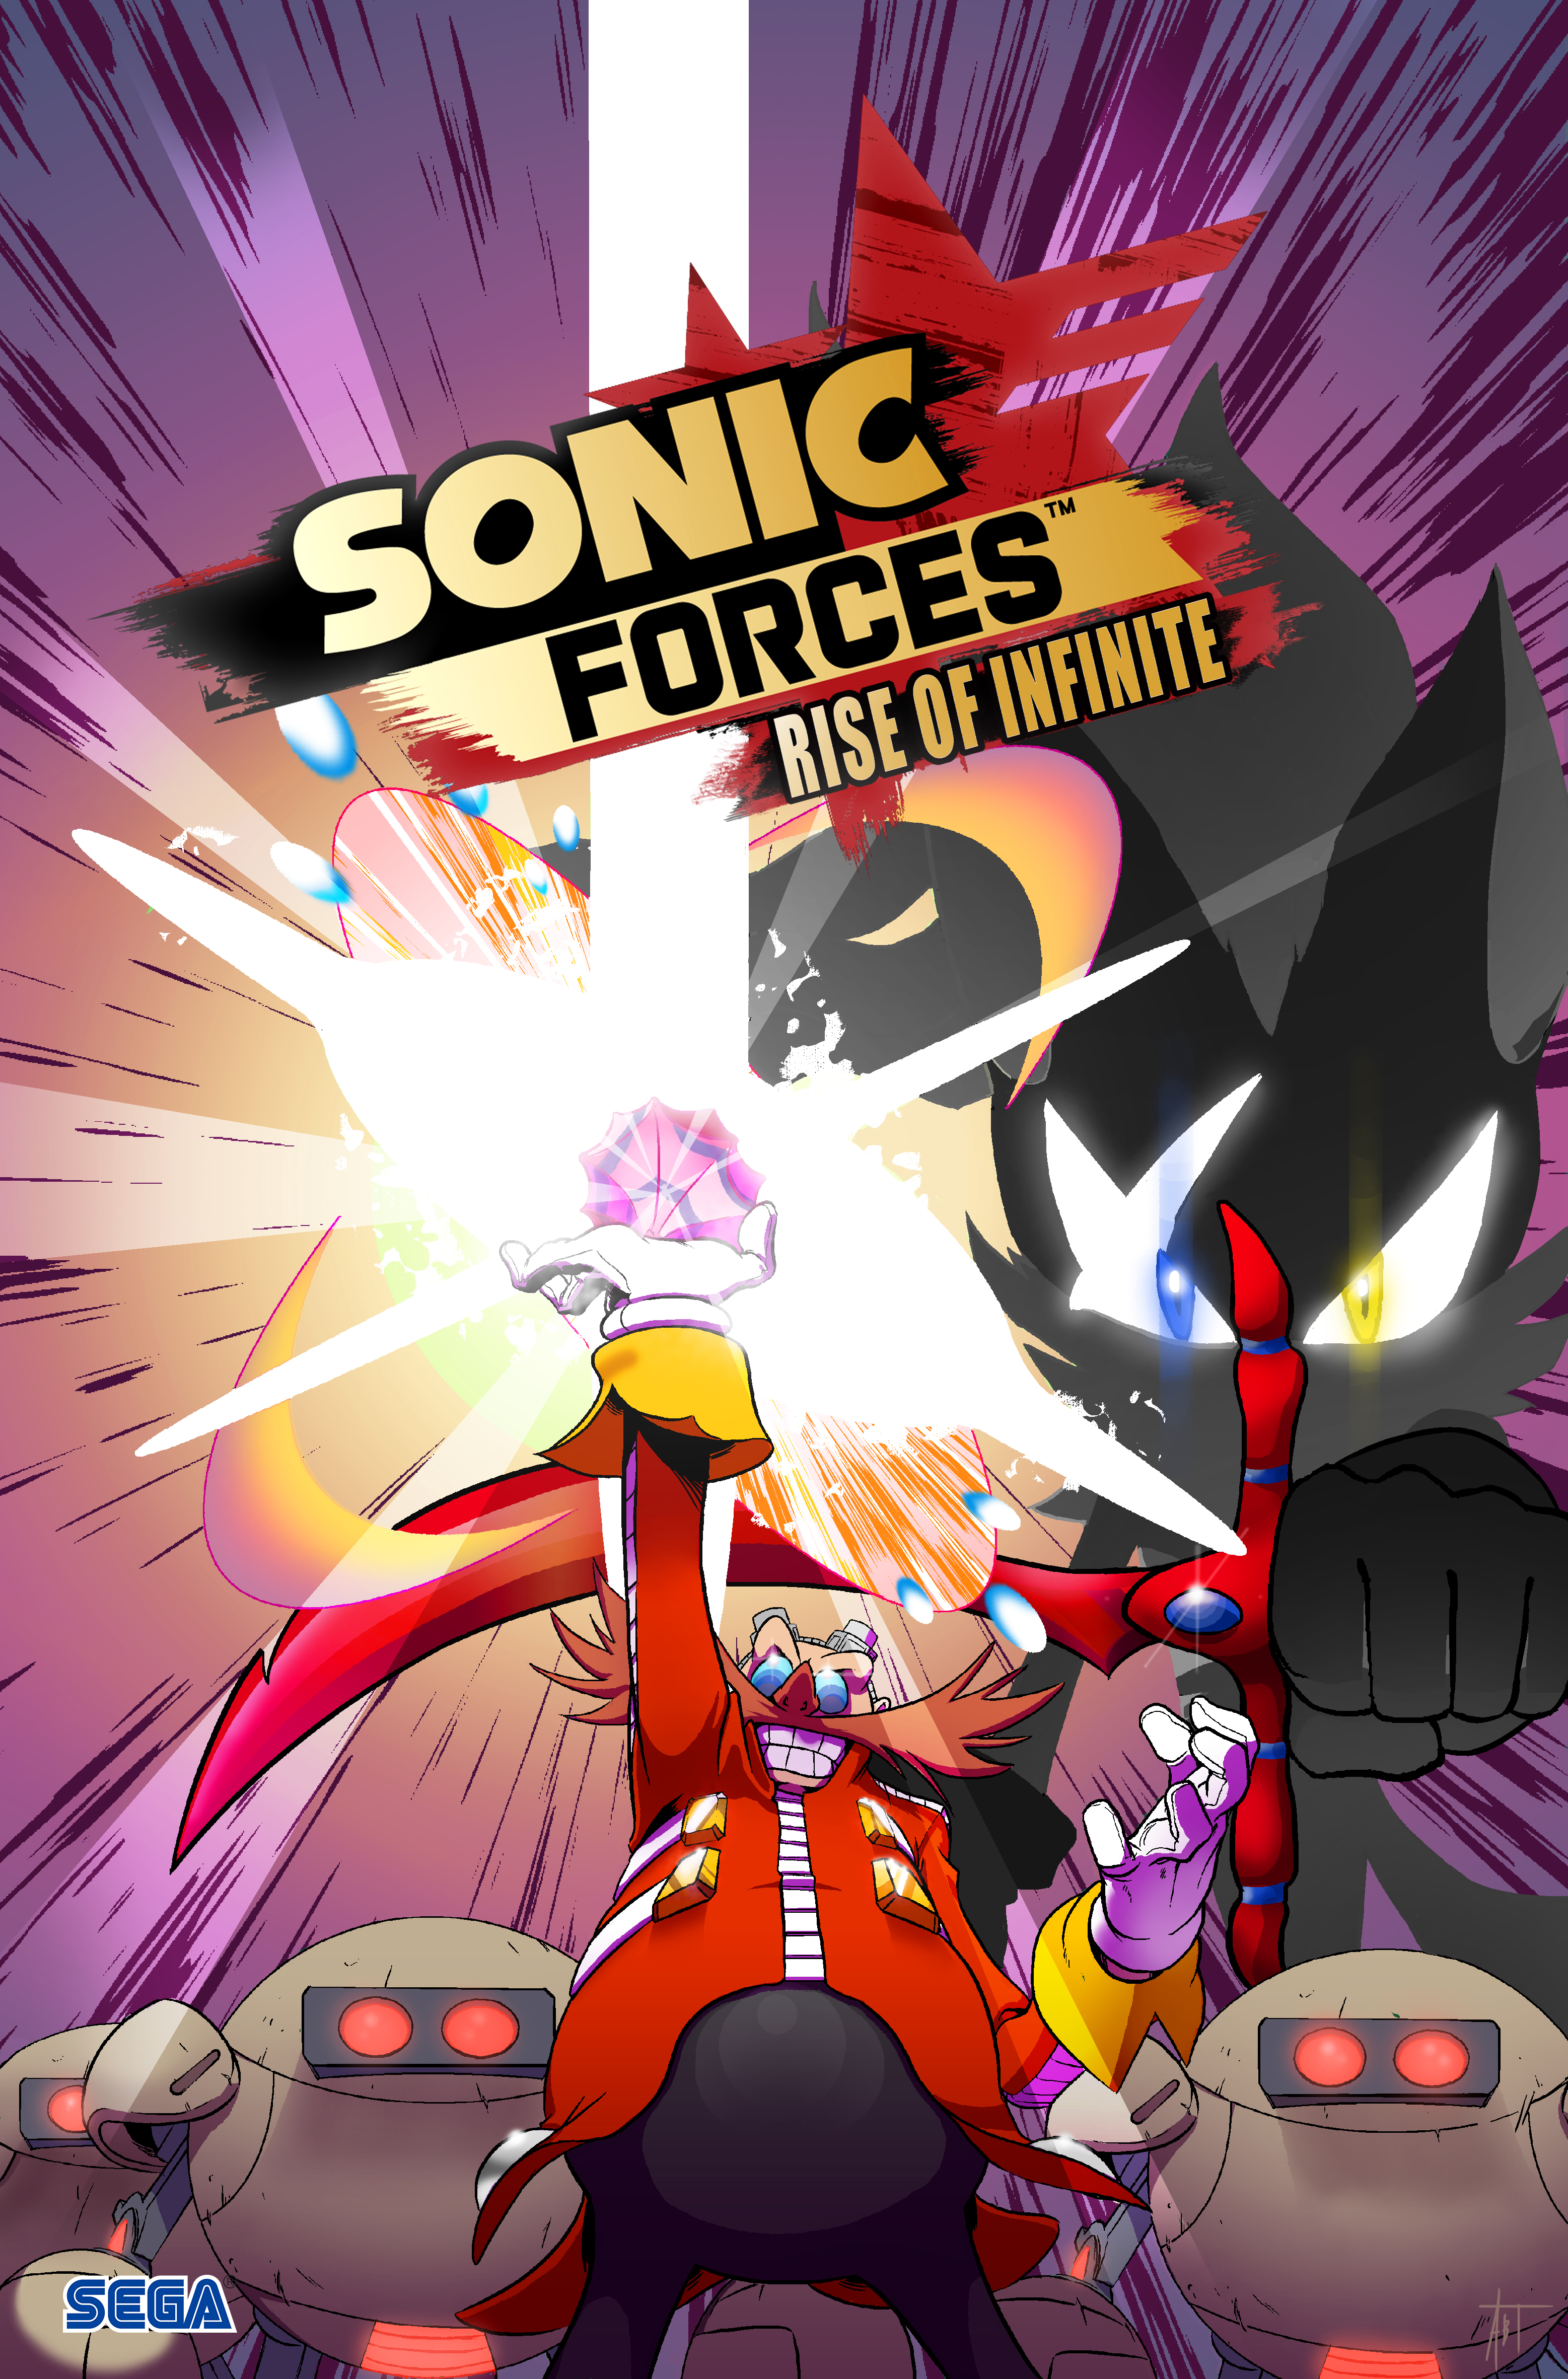 Sonic Forces Rise Of Infinite Sonic News Network Fandom